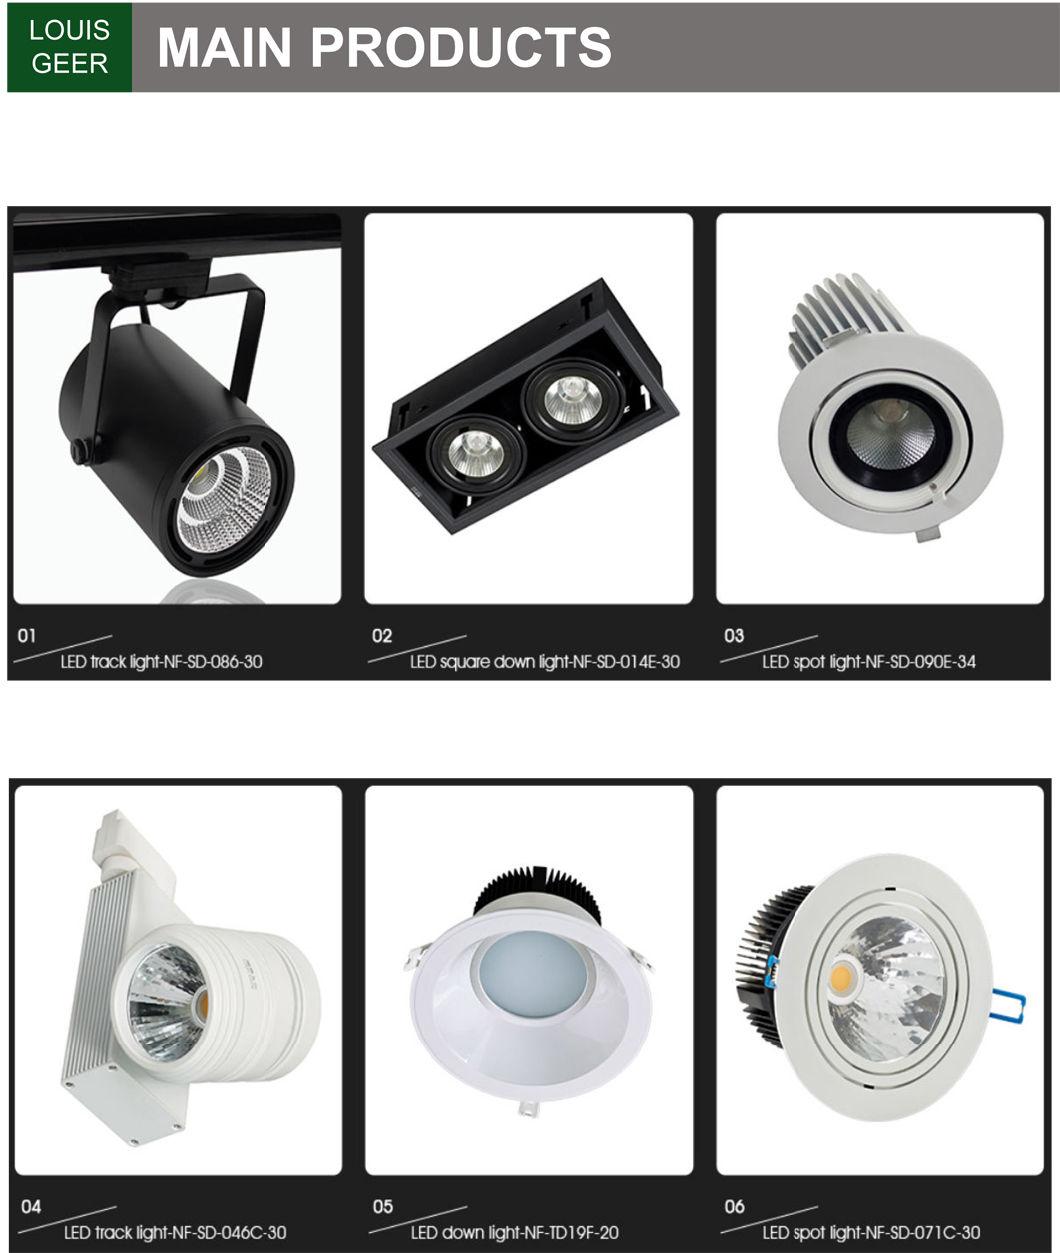 Hot Sell Round Shape Die-Casting Ceiling Light Aluminum Housing Recessed LED COB Ceiling Light for Office Hotel Hospital